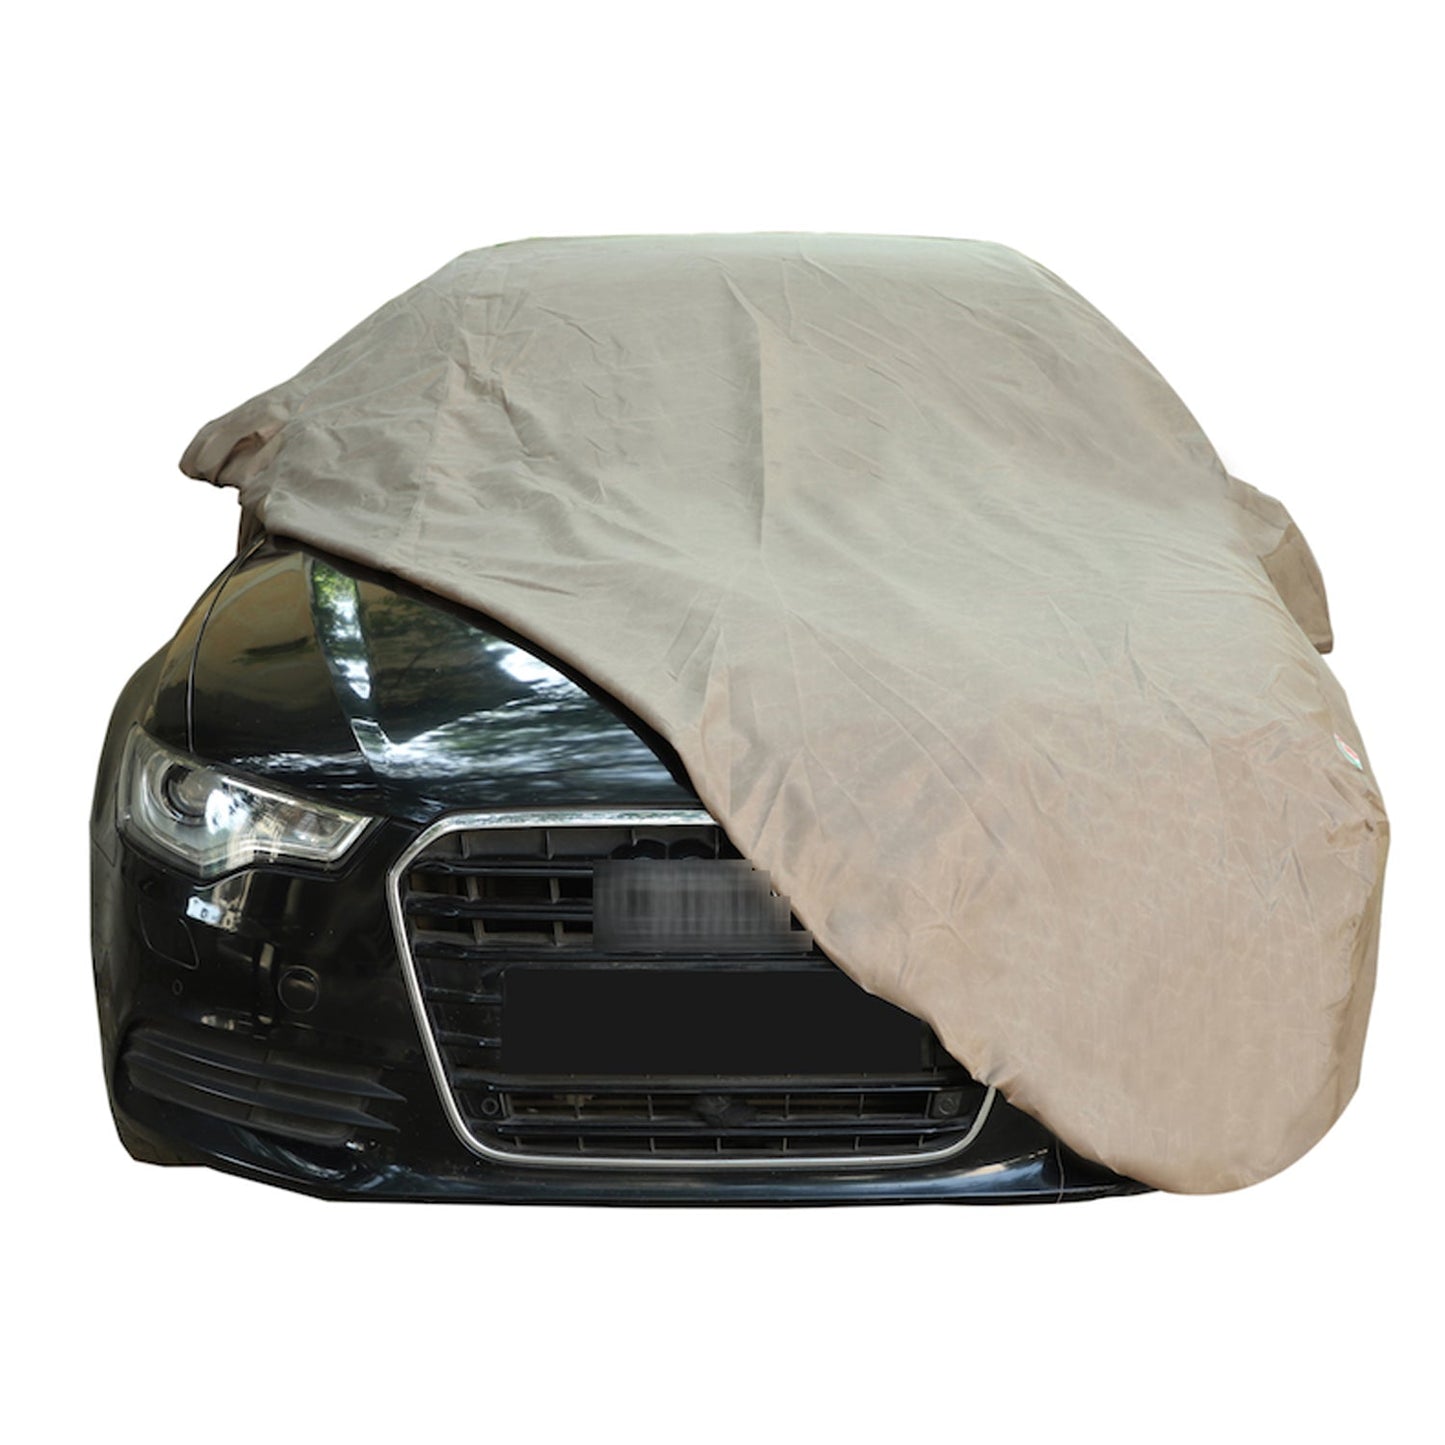 Oshotto Brown 100% Waterproof Car Body Cover with Mirror Pockets For Toyota Liva